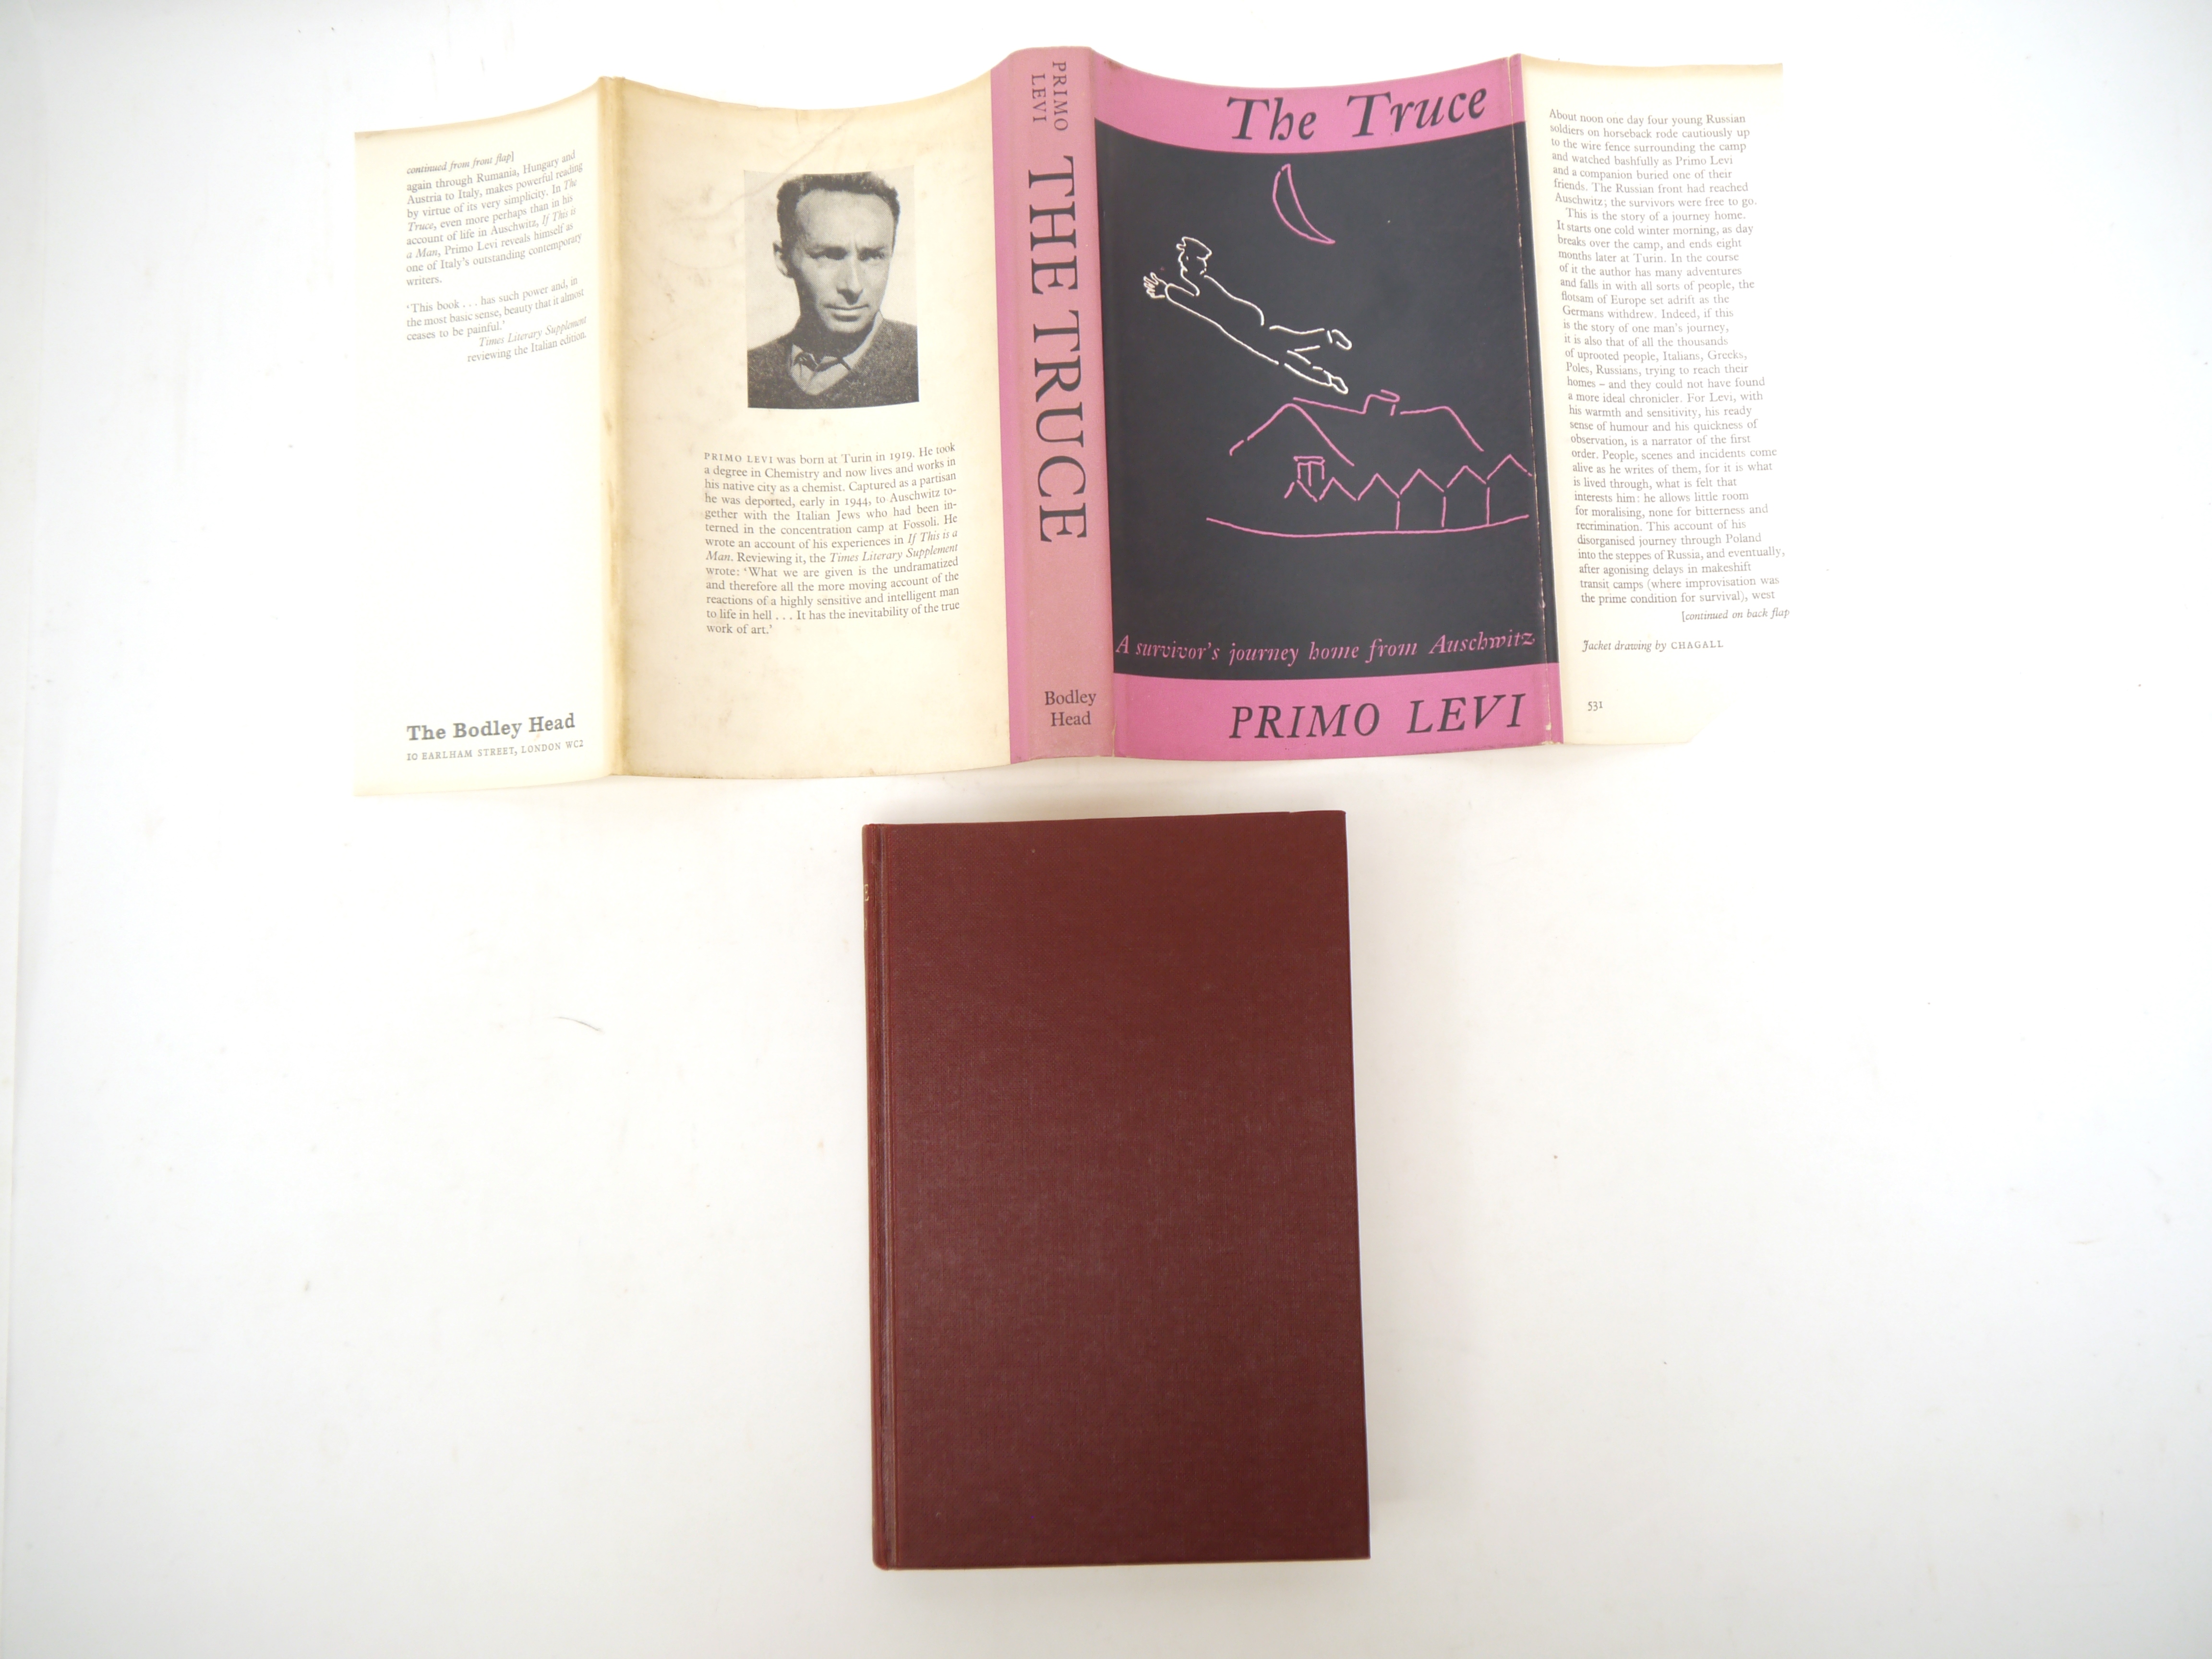 Primo Levi: 'The Truce. A Survivor's Journey Home from Auschwitz', London, The Bodley Head, 1965, - Image 4 of 4